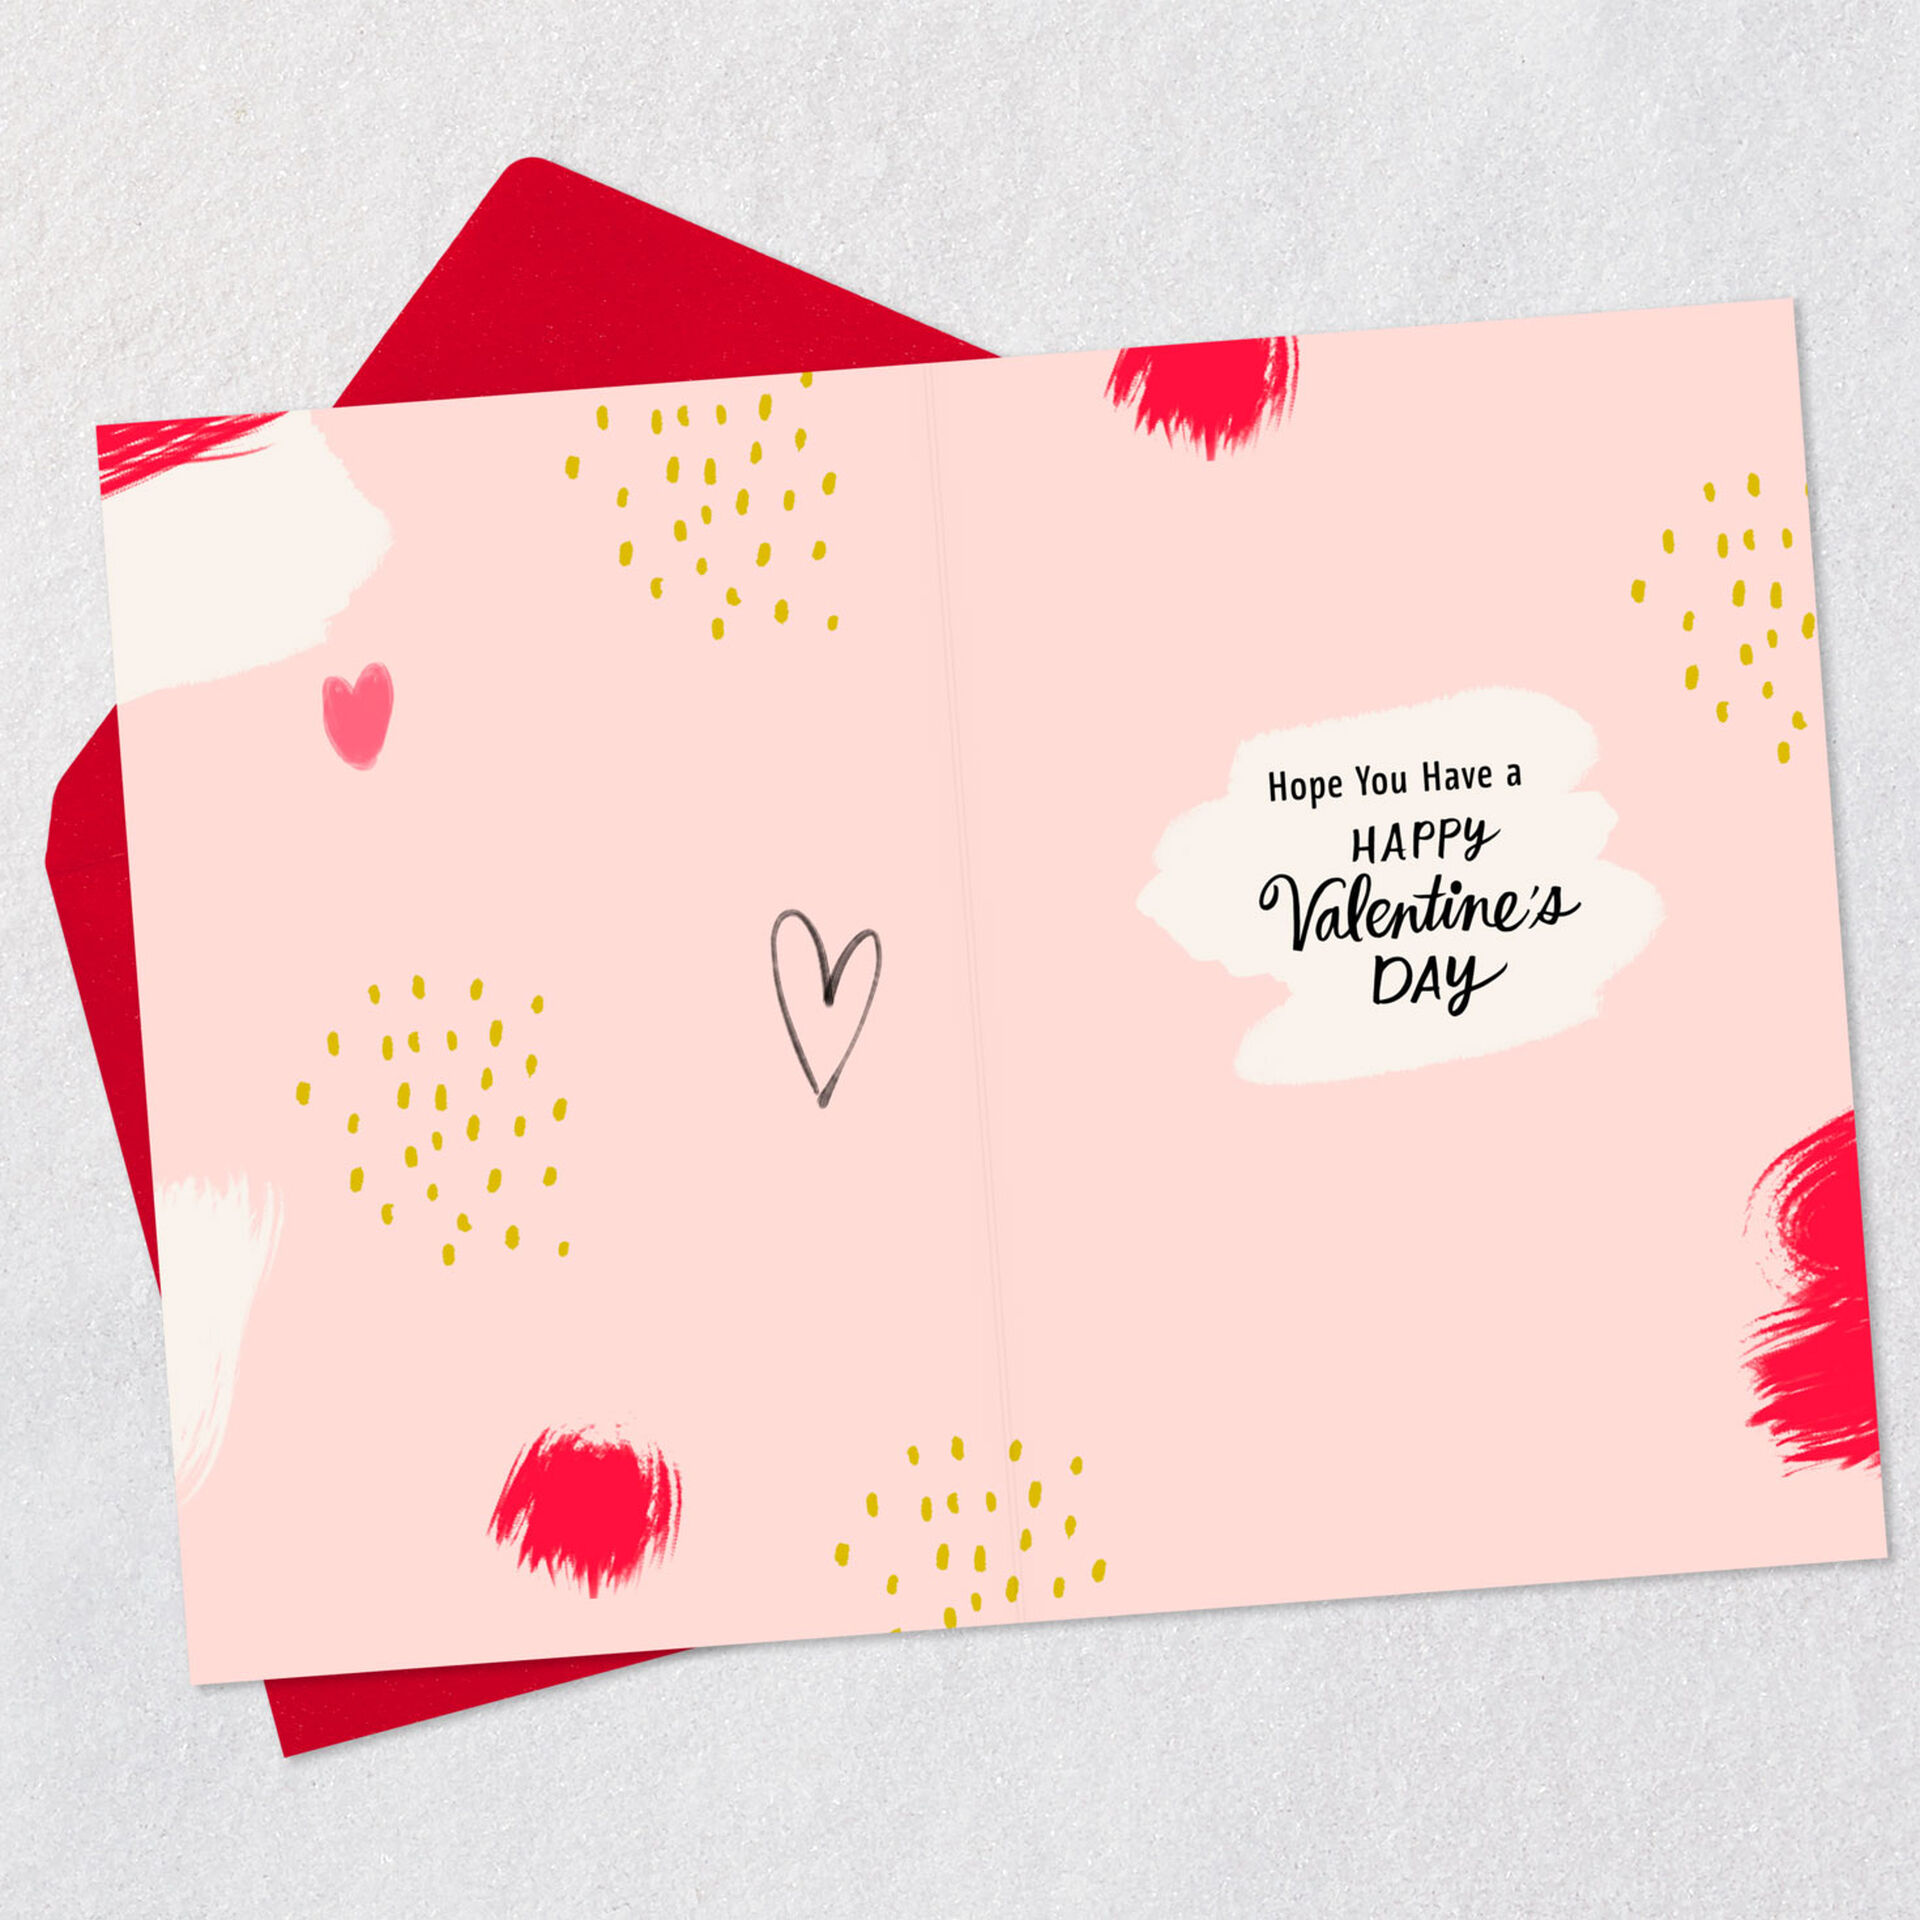 Hearts-and-Brushstrokes-Valentines-Day-Card_200VV1036_03